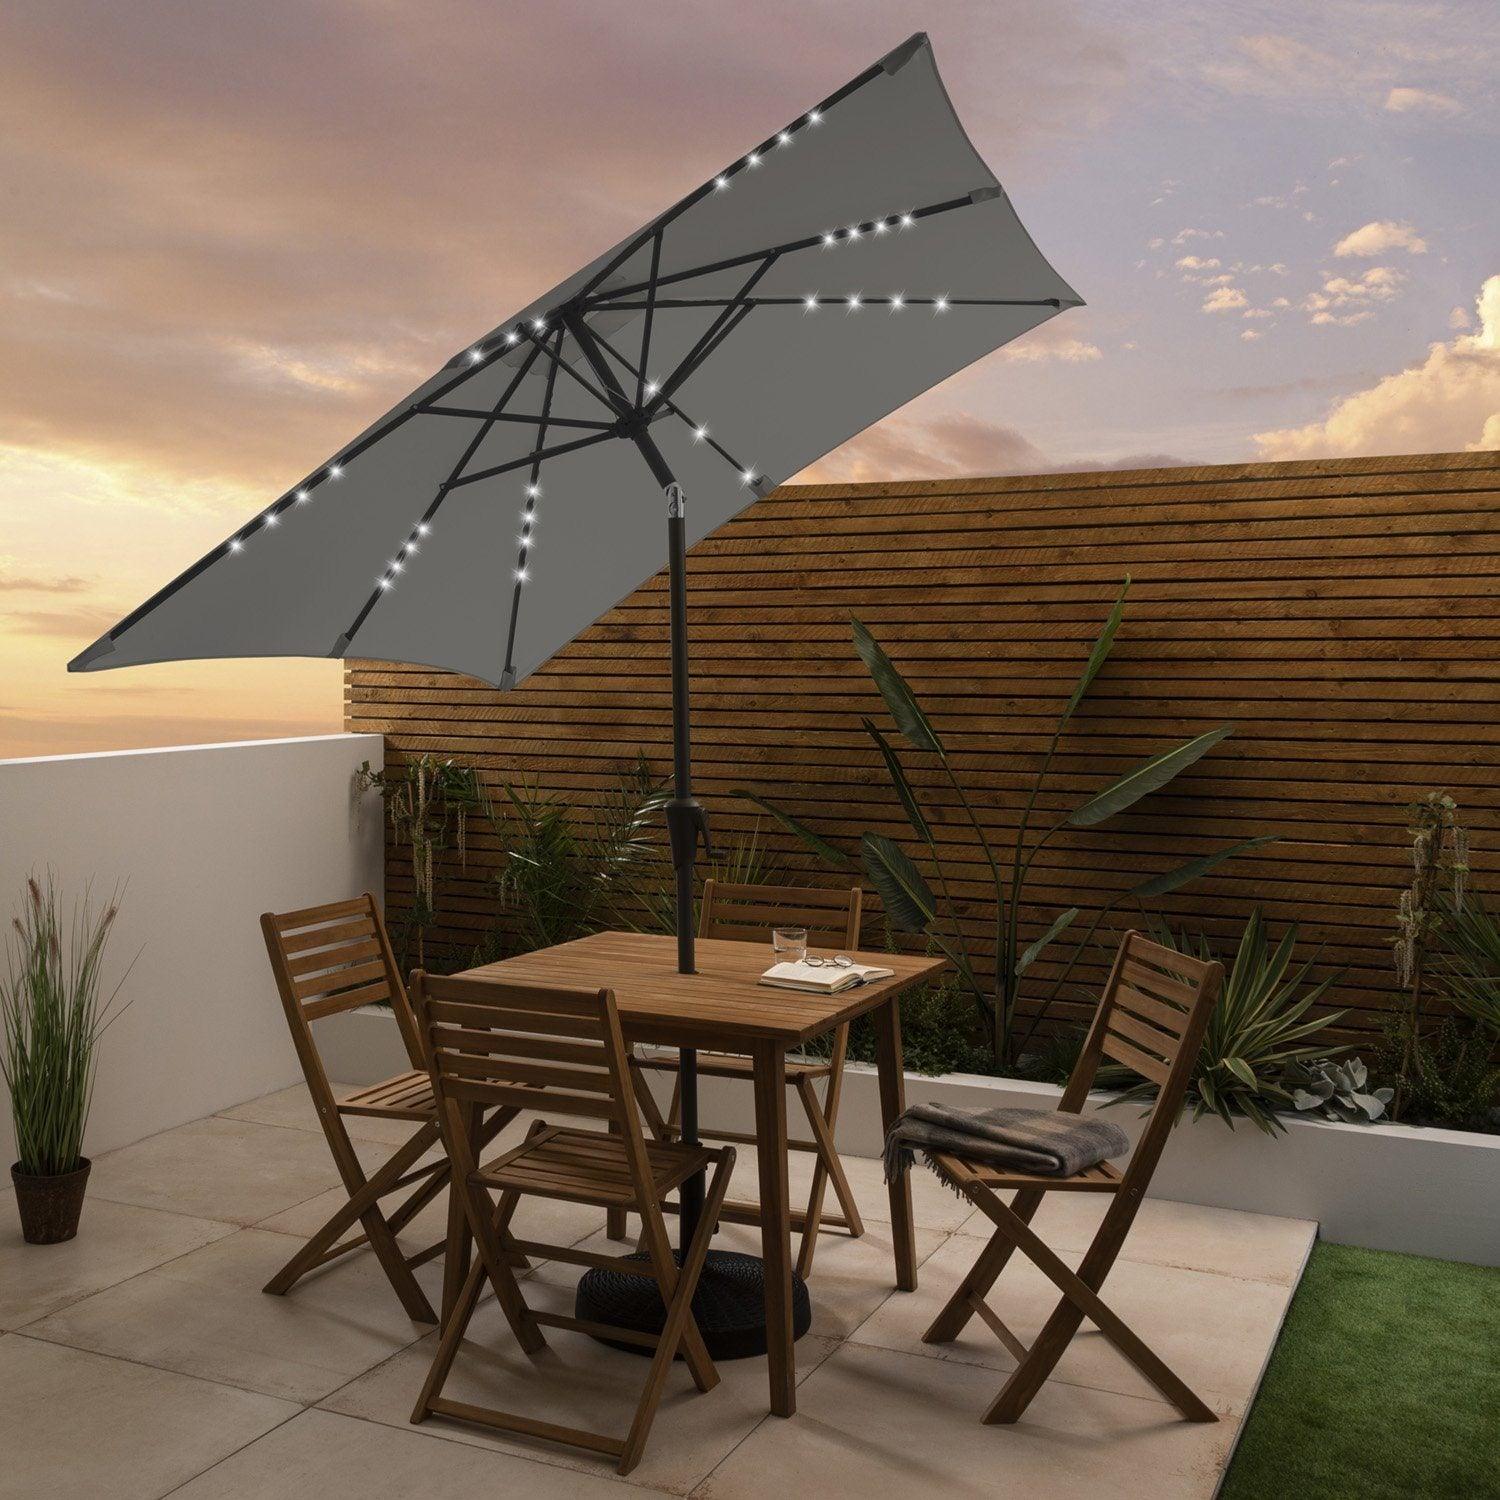 Ackley wooden garden furniture – 4 seater outdoor dining set with grey premium parasol - Laura James